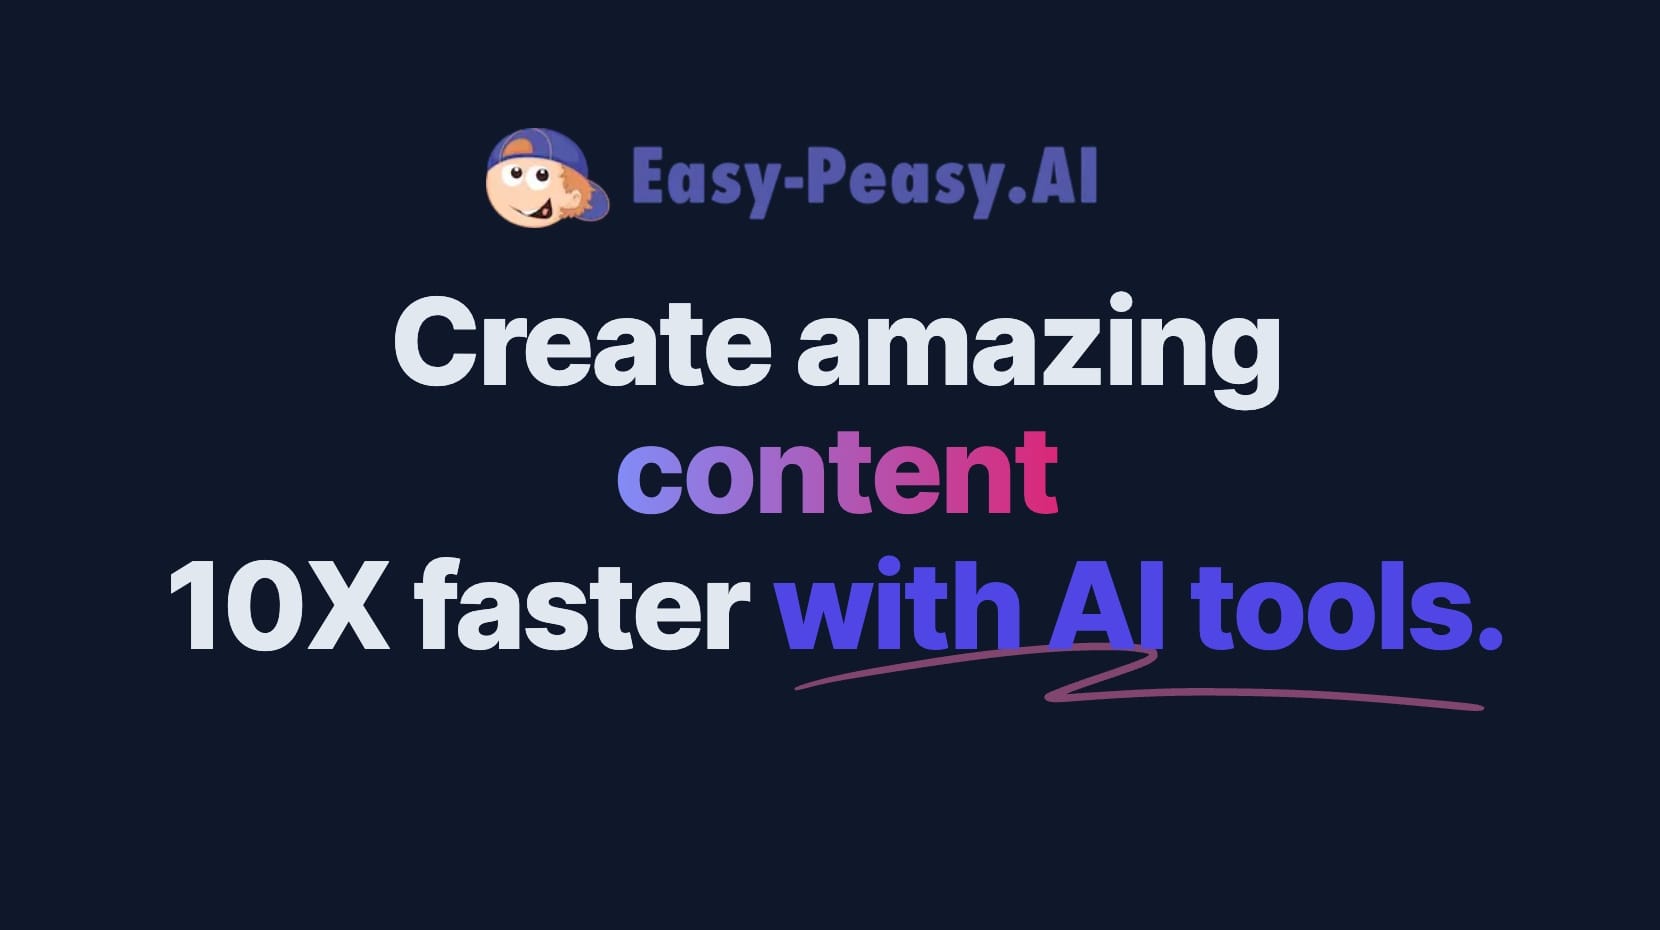 Easy-Peasy.AI - AI generated text, images, and transcriptions